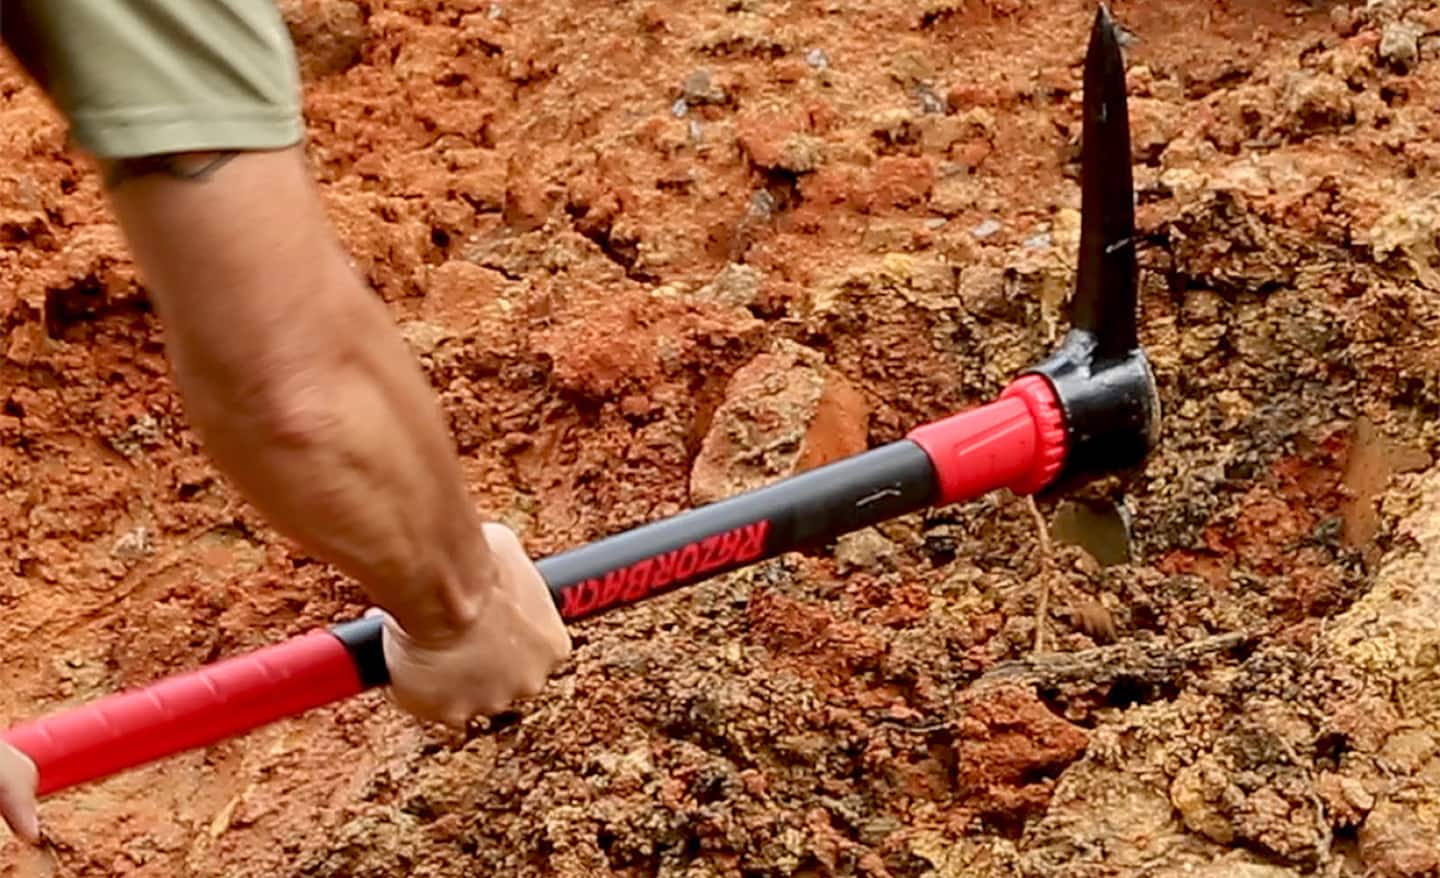 A person uses a pick axe to dig in dirt.